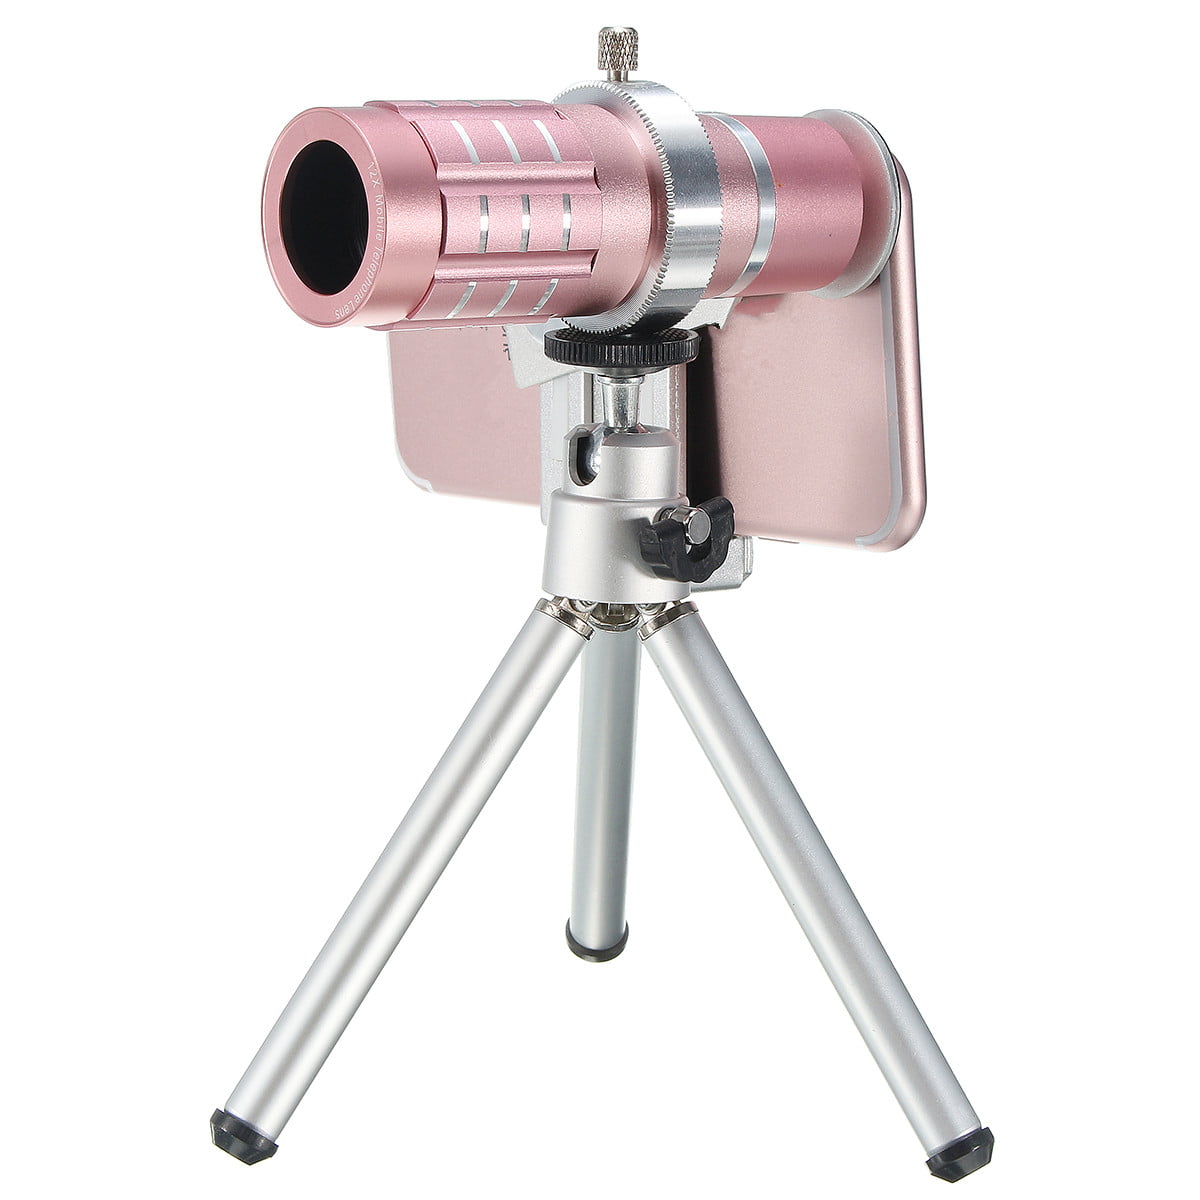 12 Times Telephoto Mobile Phone Camera Telescope/High-Definition High-Definition Metal External Universal with Tripod-Pink 